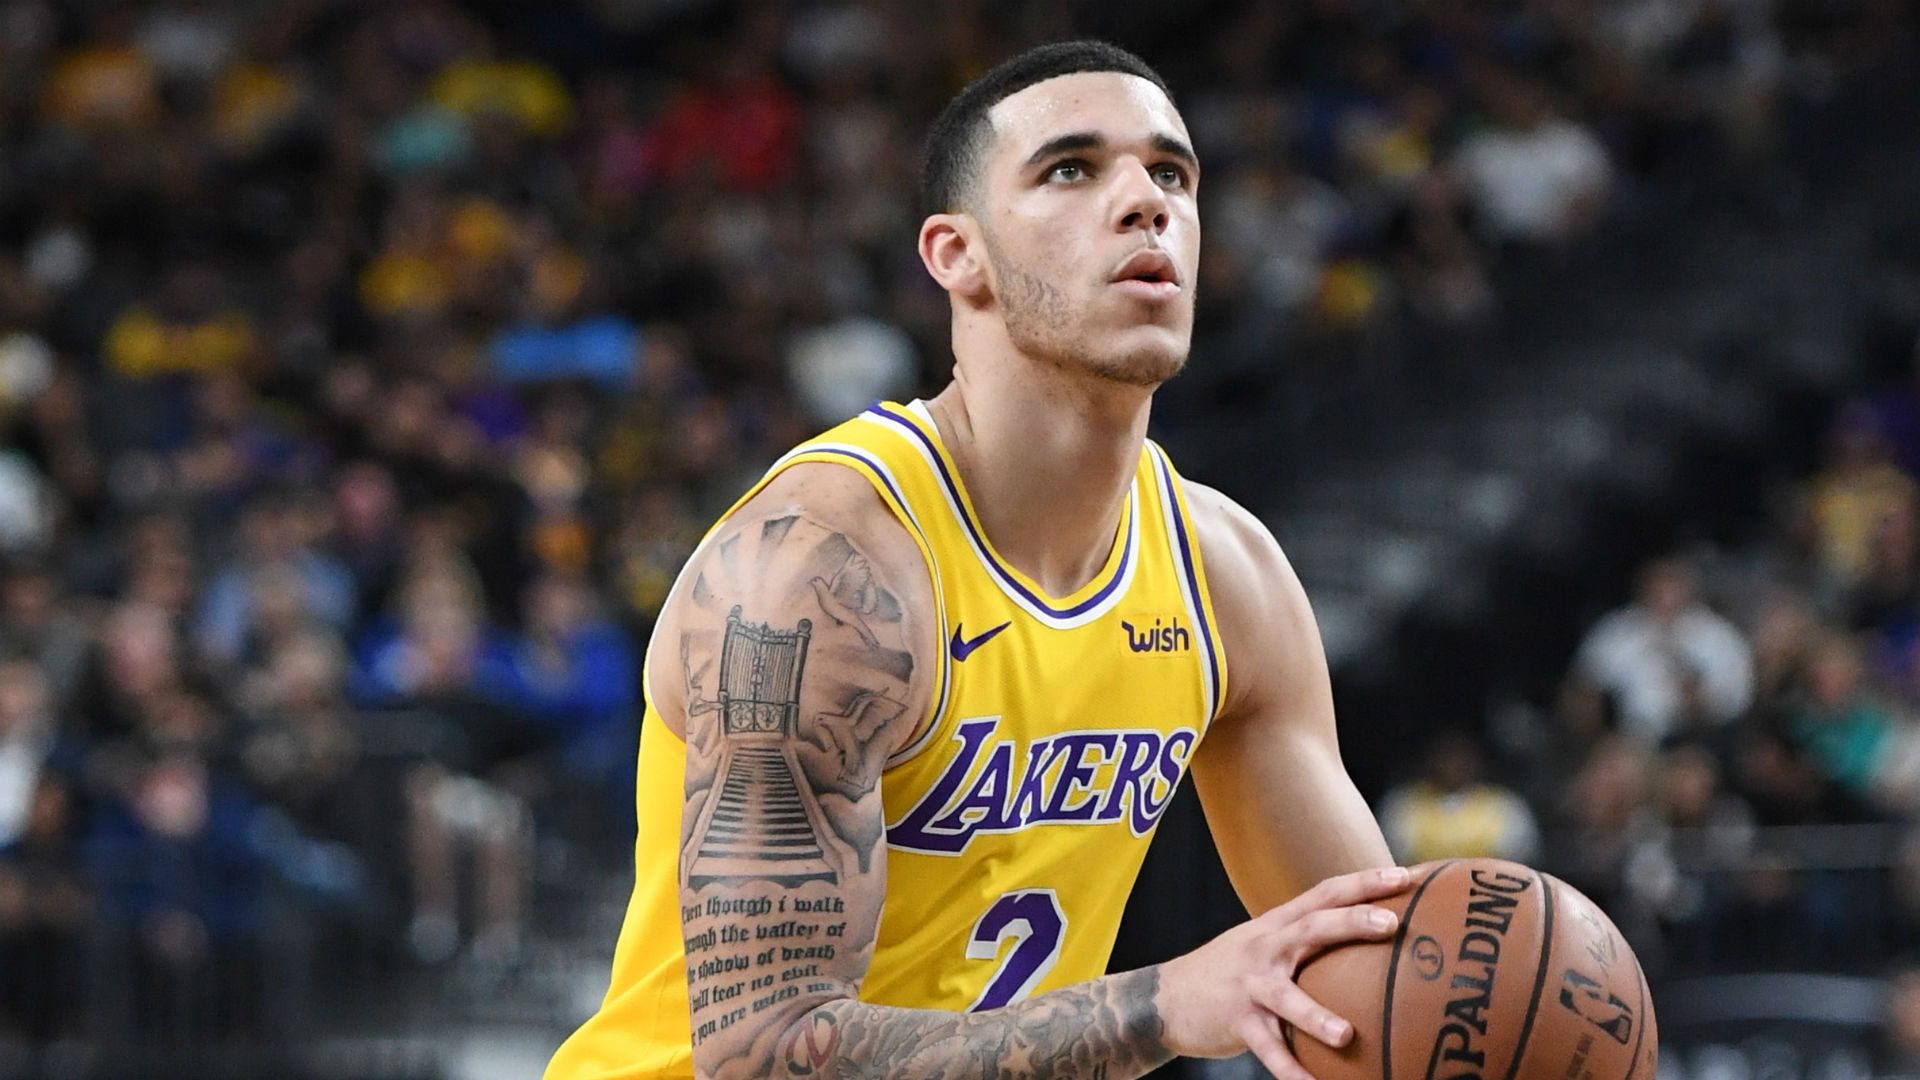 Lonzo Ball Planned Unauthorized Surgery Says Sporting News